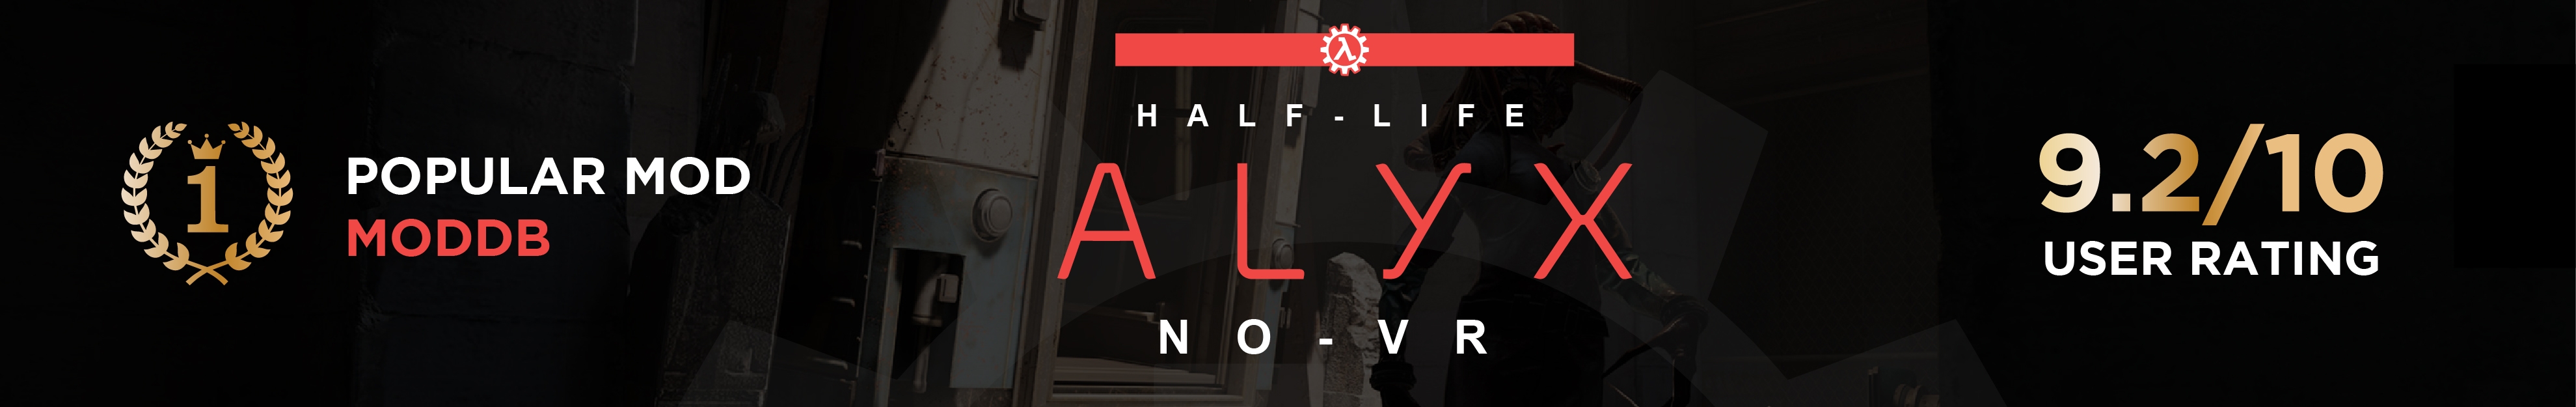 Half-Life: Alyx NoVR Mod Update #7 is available for download